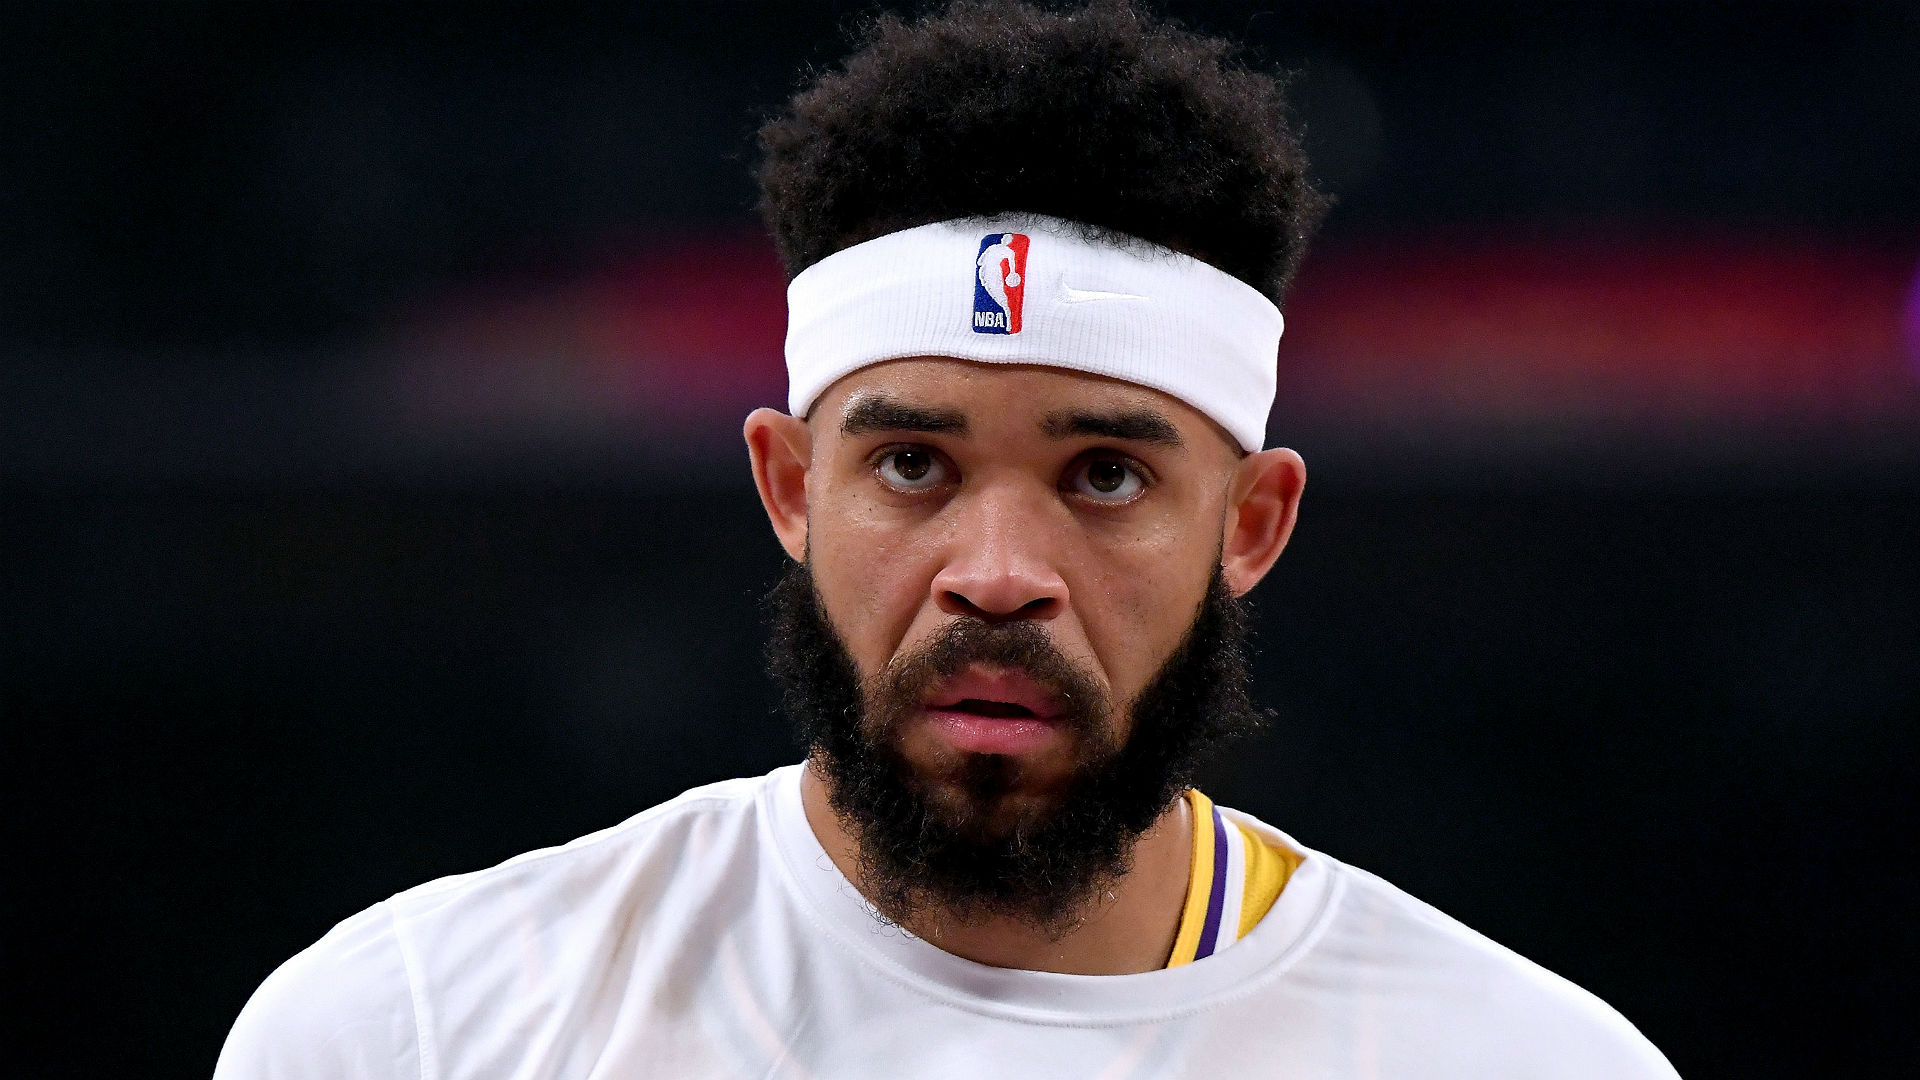 The Los Angeles Lakers may be out of playoff contention, but JaVale McGee urged them to continue fighting.